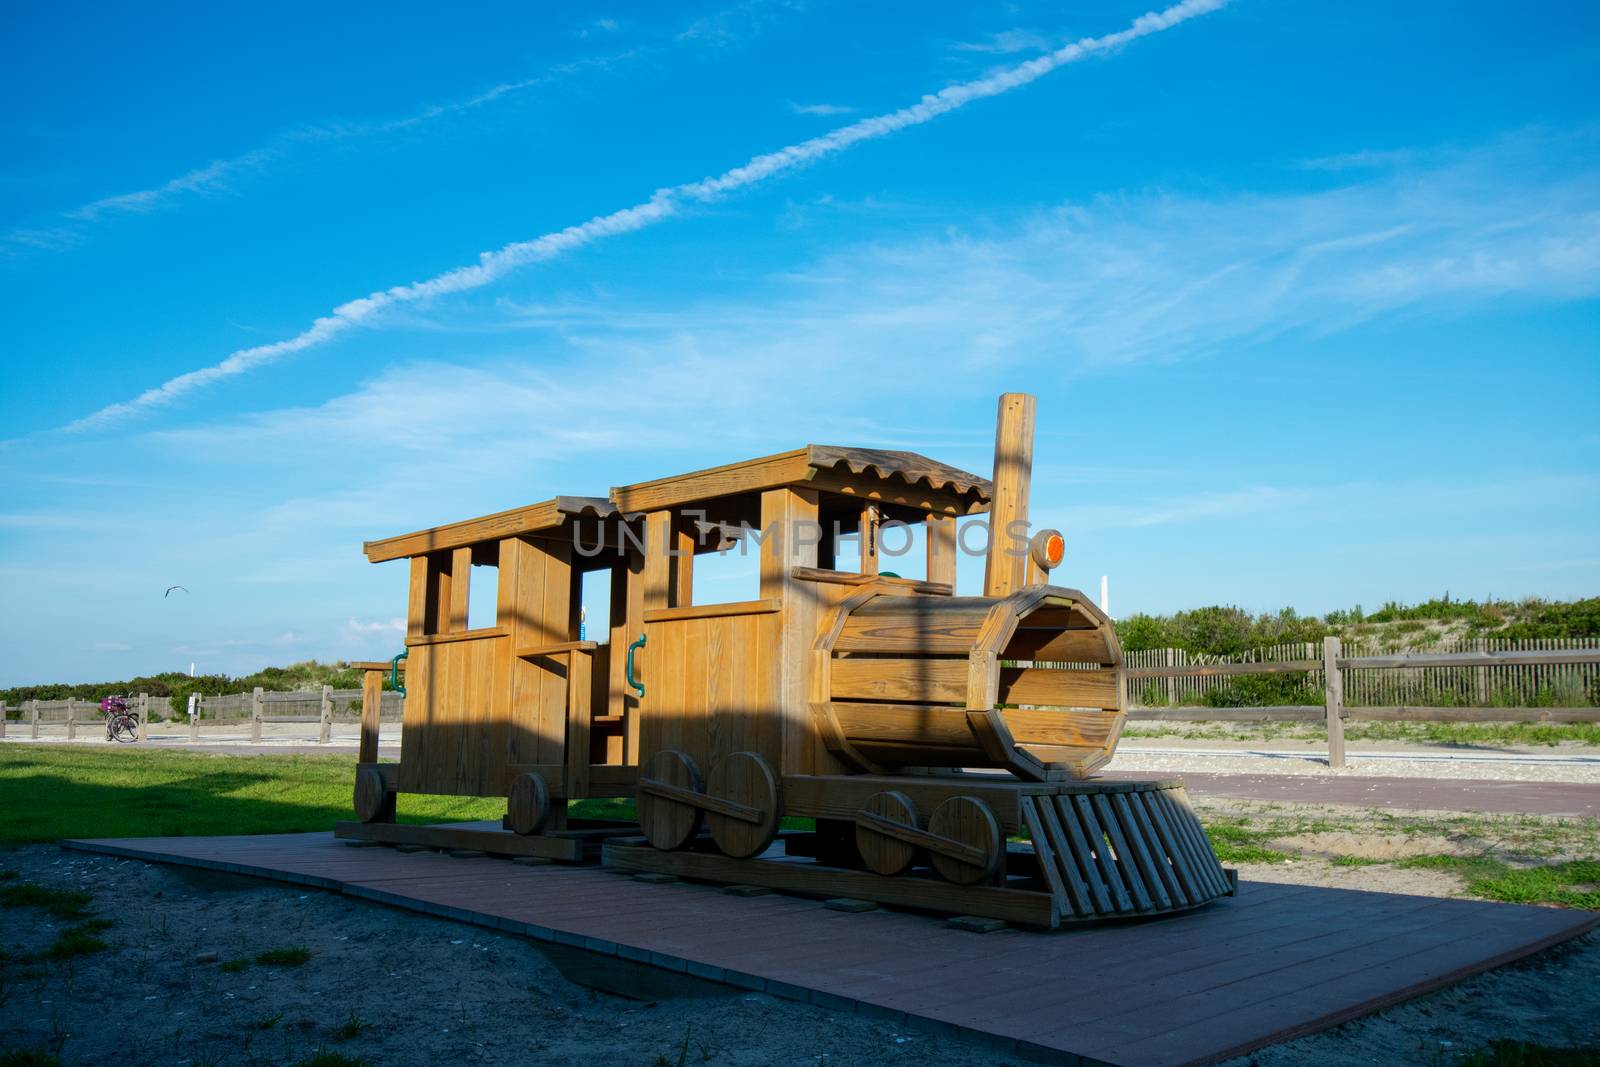 A Wooden Train on the Beach in Wildwood New Jersey by bju12290